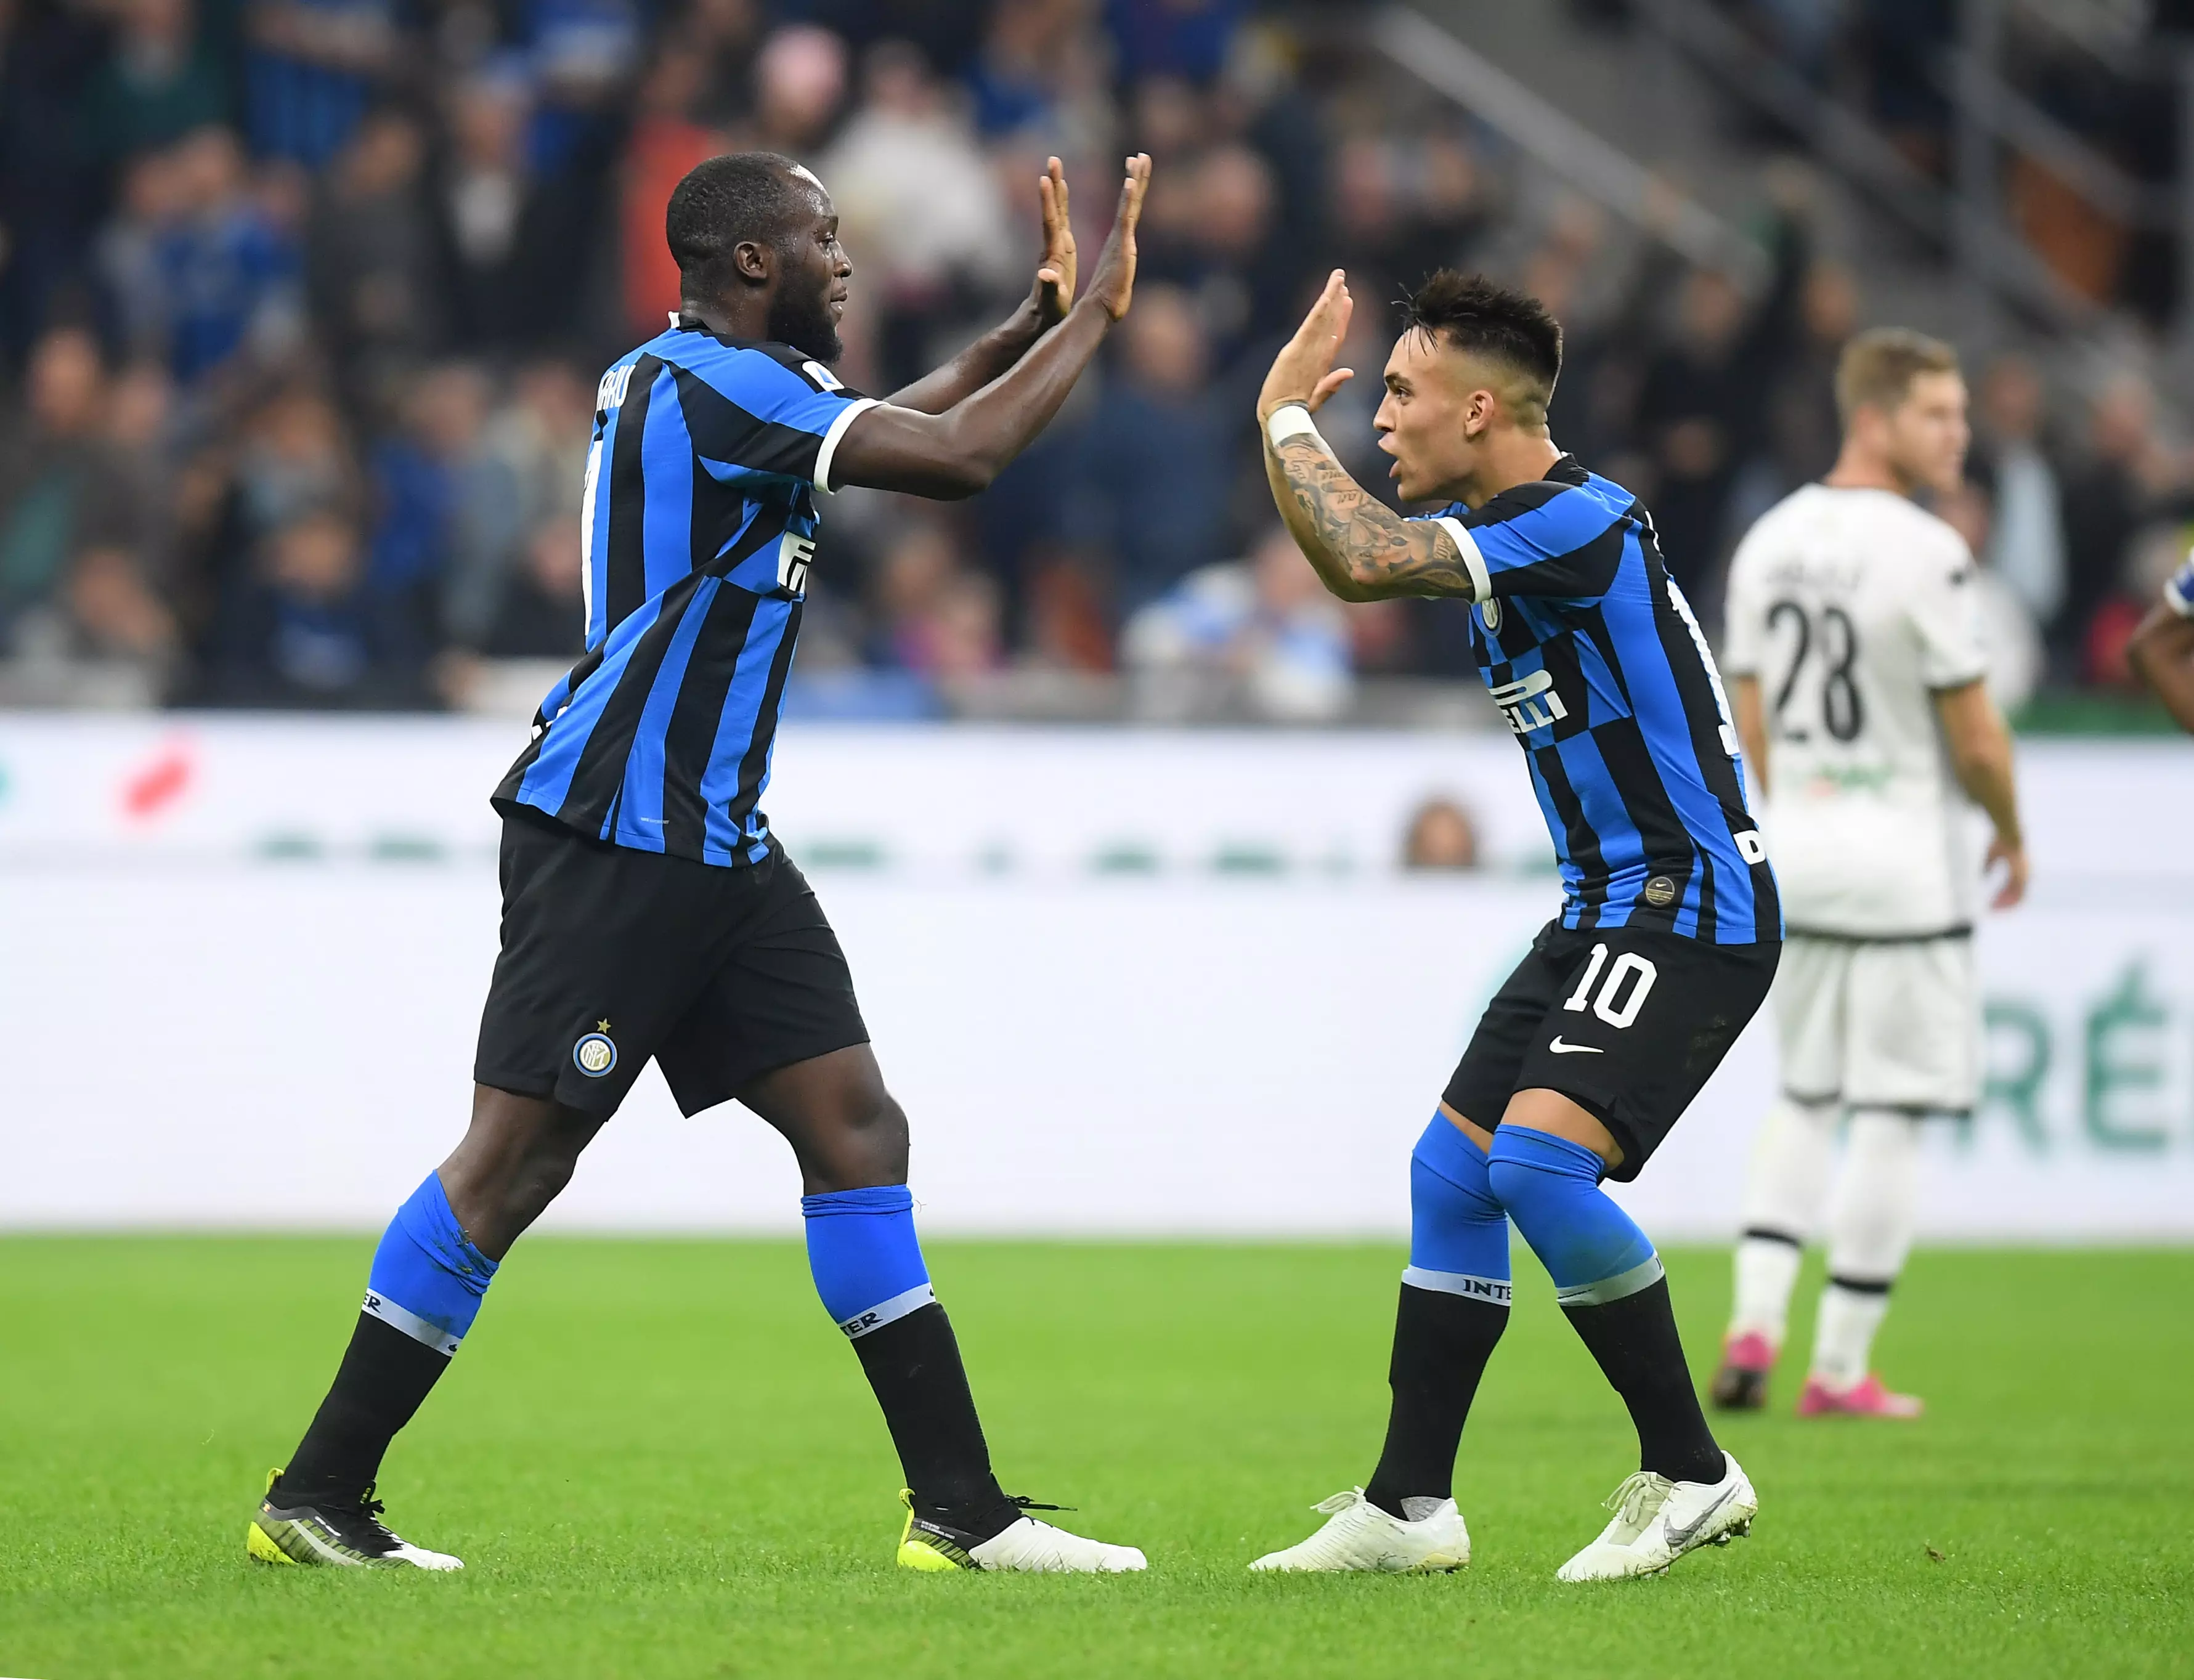 Romelu Lukaku and Lautaro Martinez have formed a brilliant partnership for Inter Milan this year. (Image